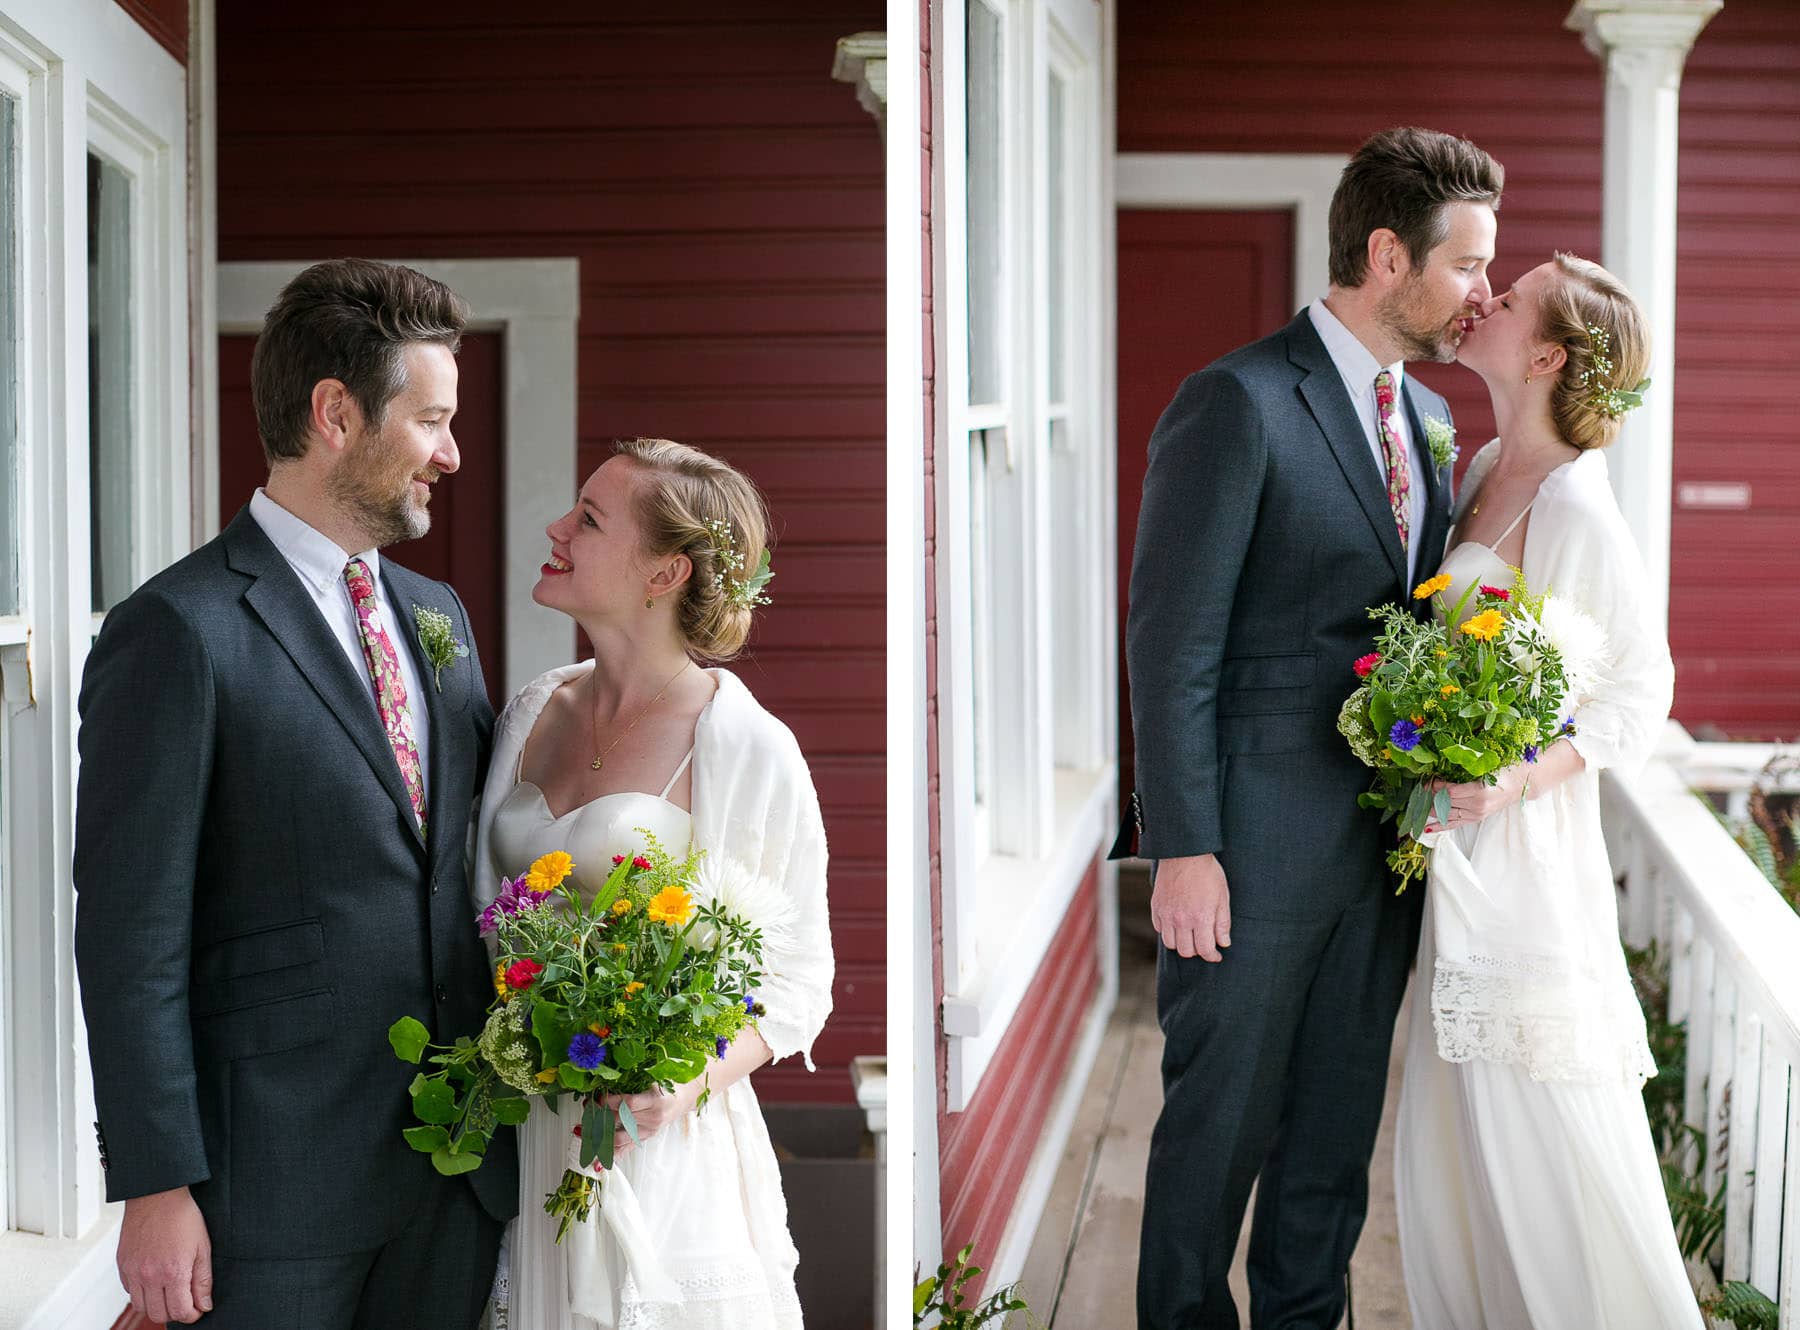 Diptych of Groom and bride on porch of red house in wedding clothes